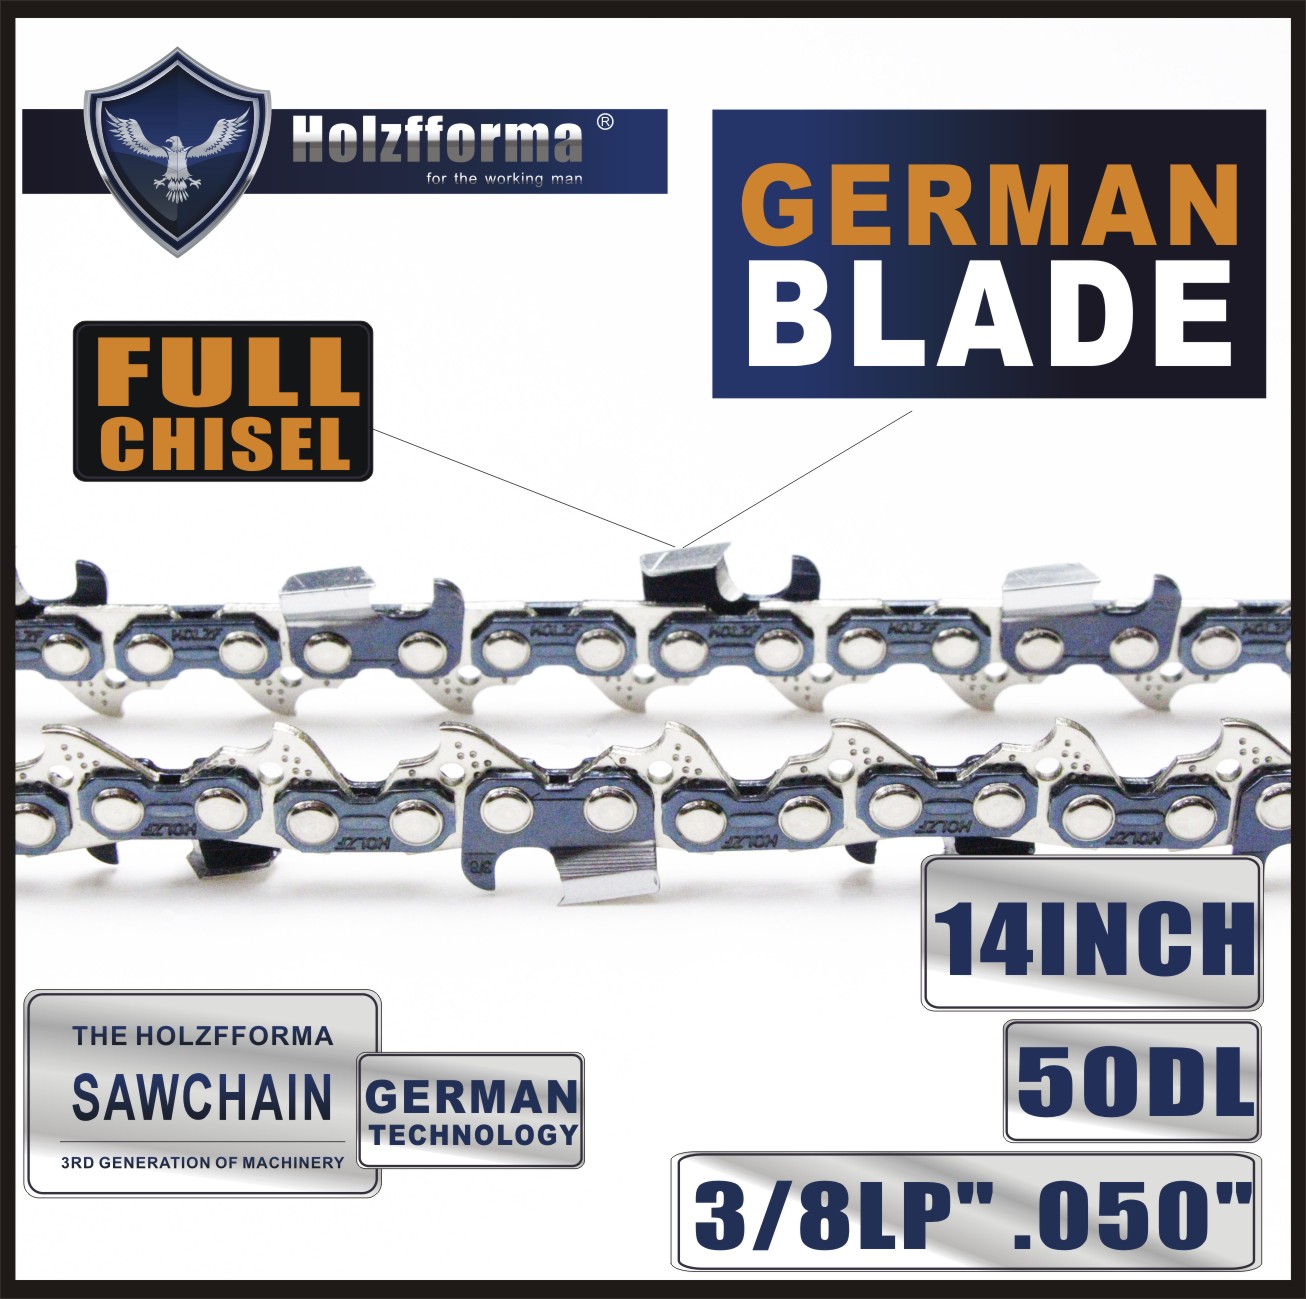 16/'/' Chainsaw Saw Chain Blade 3//8LP .050/" 55DL For STIHL MS170 MS180 MS181 MS190